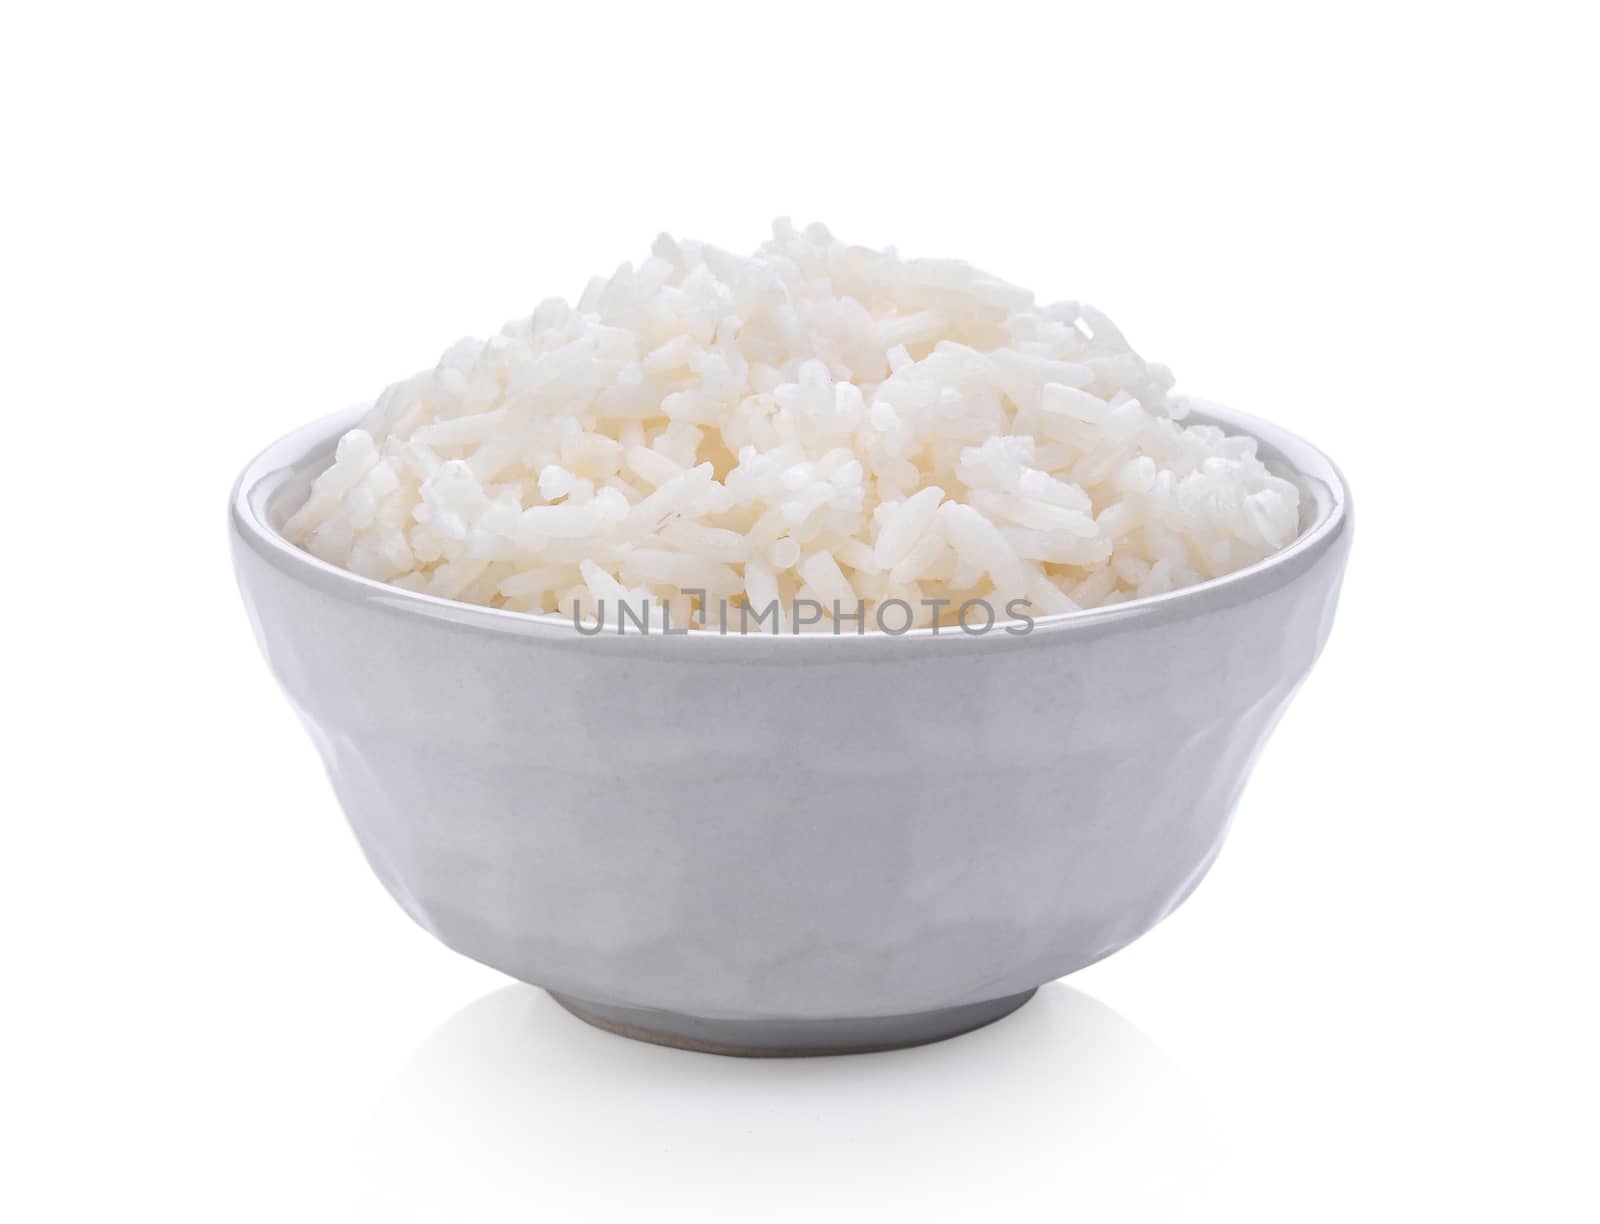  jasmine Rice in a bowl on white background